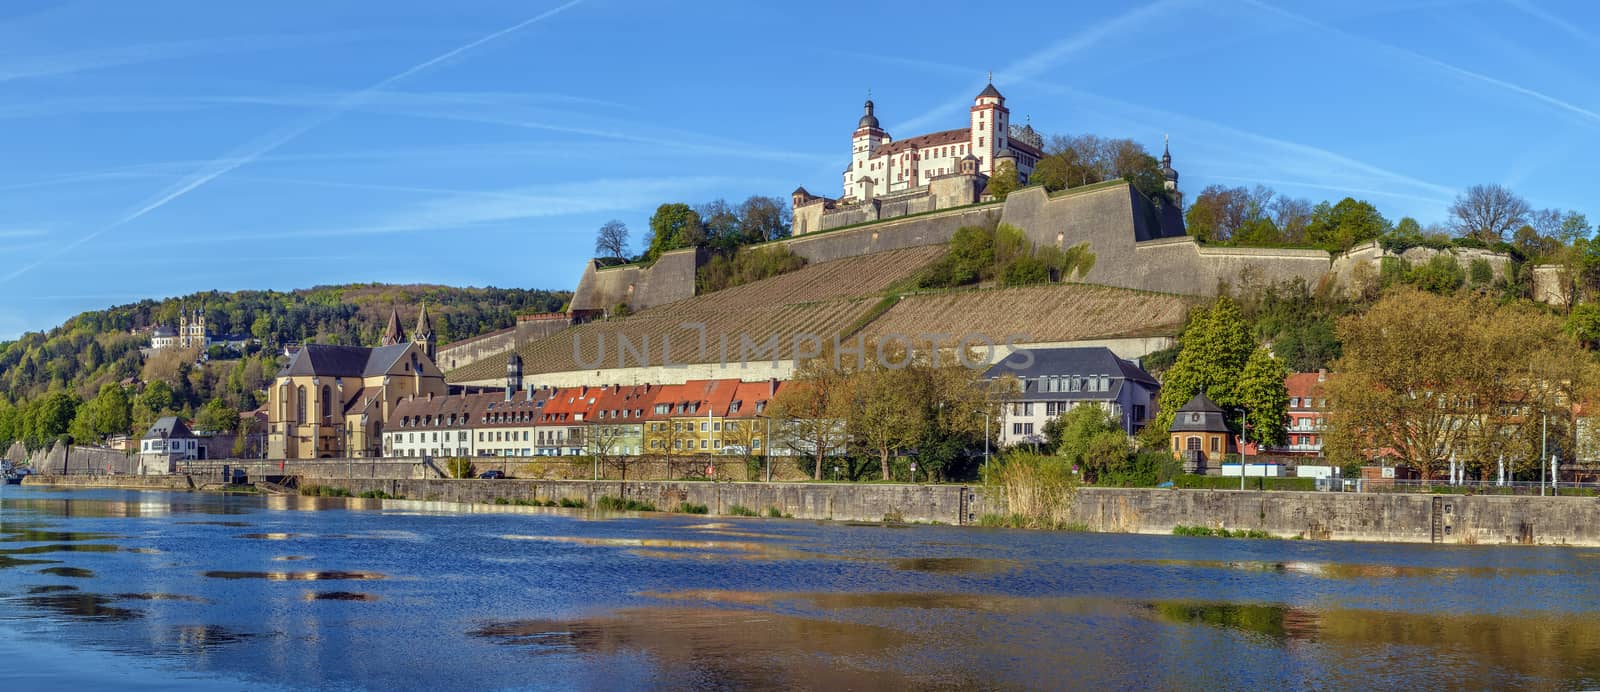 Panoramic view of Marienberg Fortress from Main river, Wurzburg, Germany